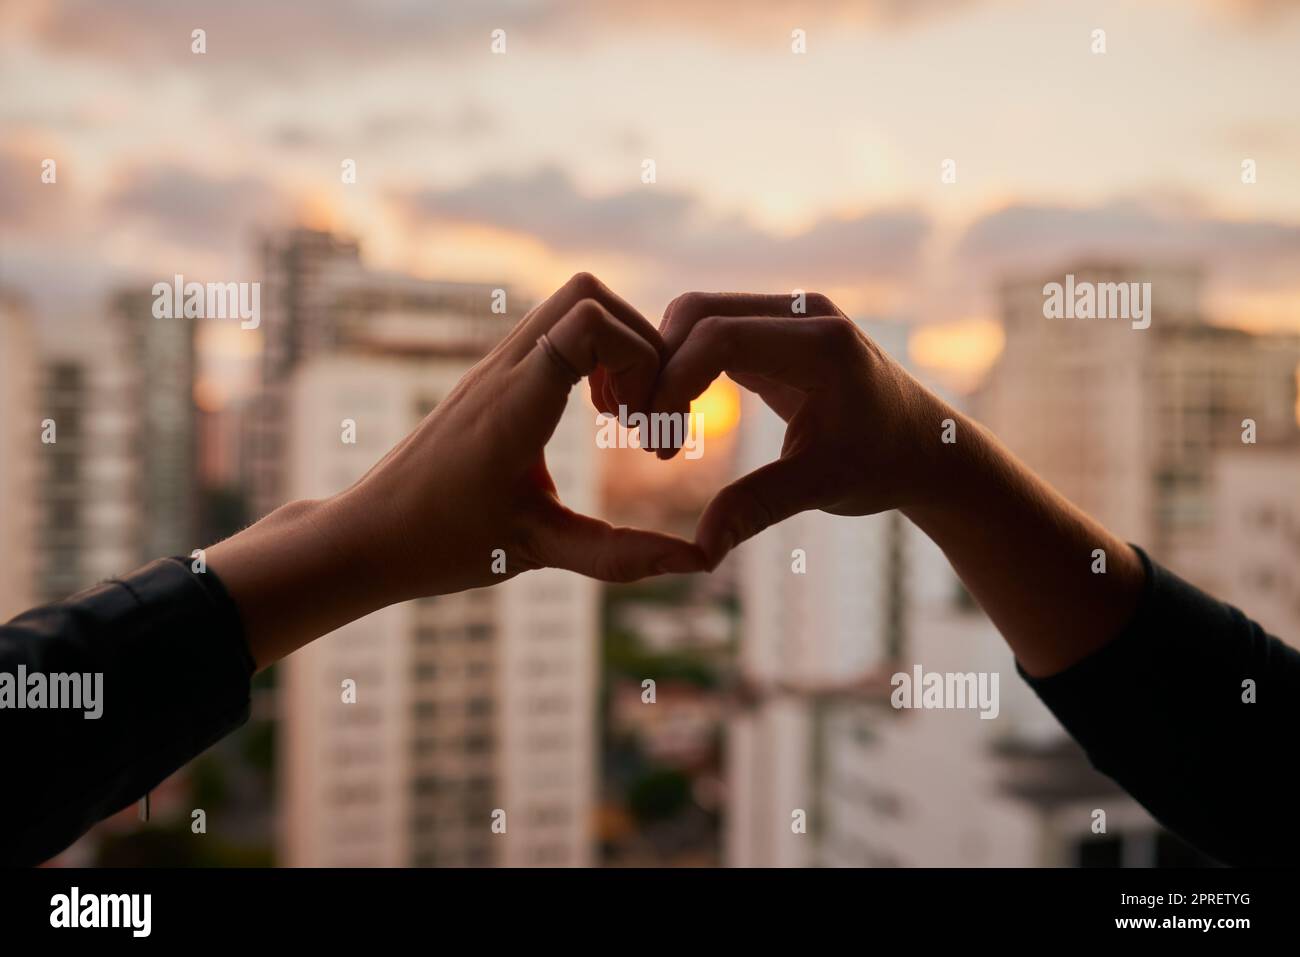 We love this city. an unrecognizable couple making a heart shape with their hands against a city background. Stock Photo